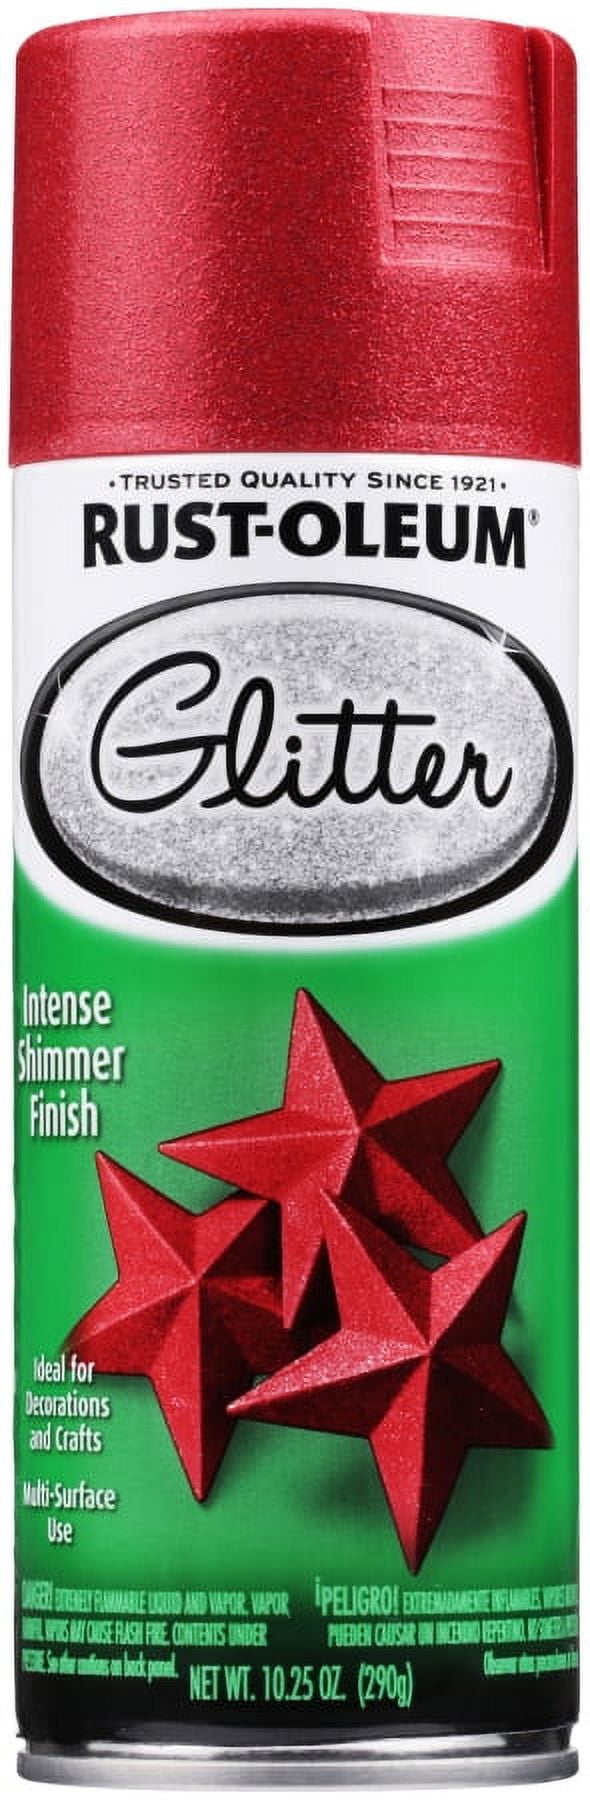 Rust-Oleum 268045-6PK Specialty Glitter Spray Paint, 10.25 Oz, Red, 6 Pack